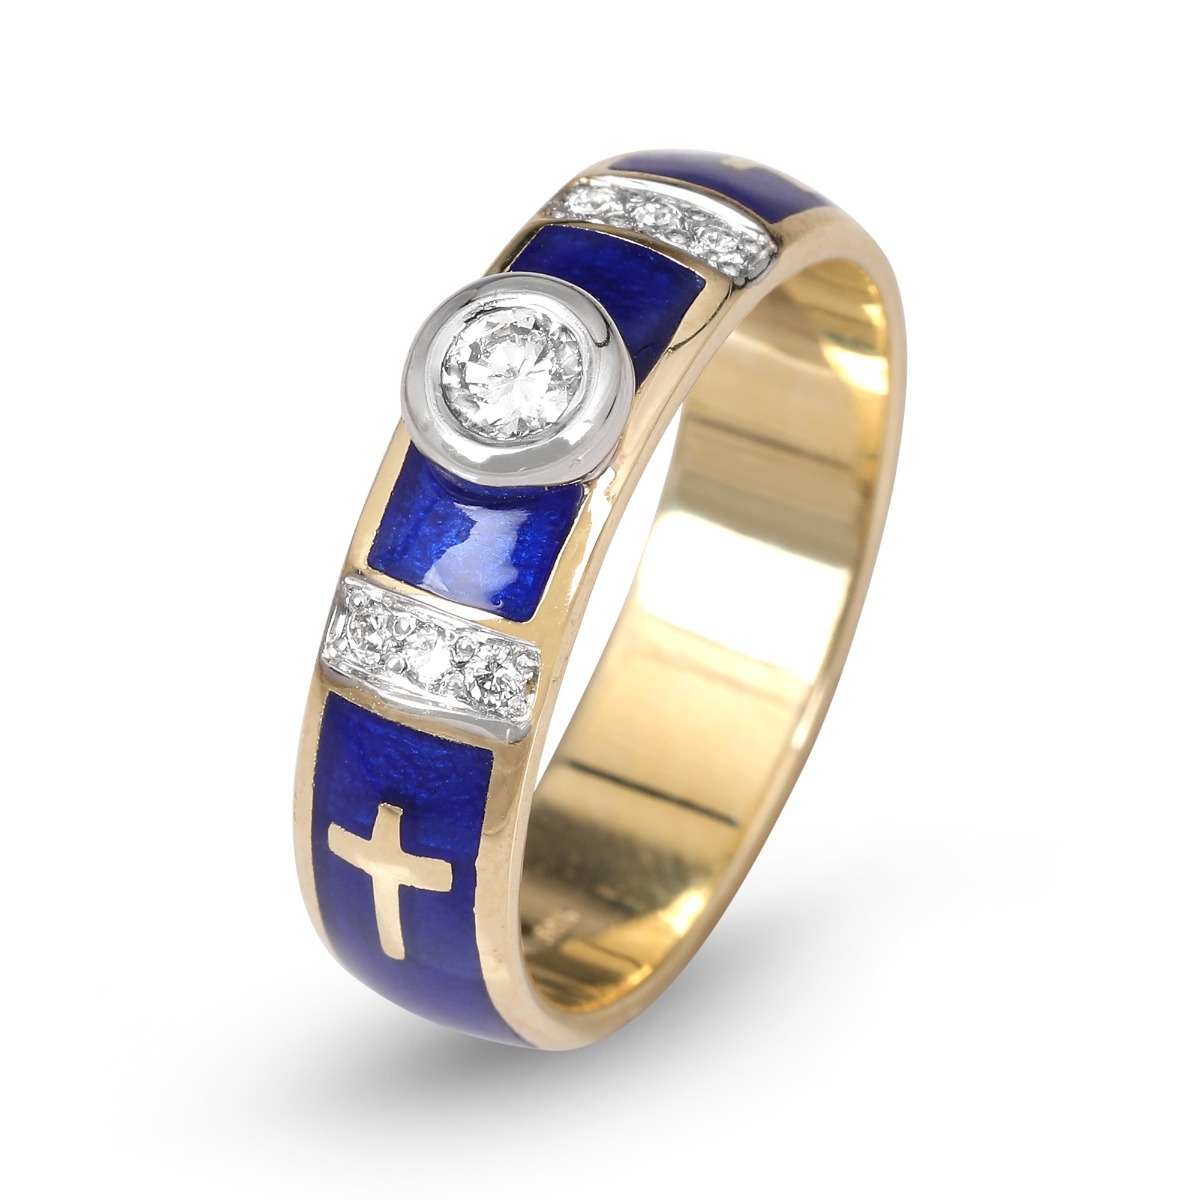 9 Latest Collection of Christian Wedding Rings in Different Metals |  Evlilik, Nişan